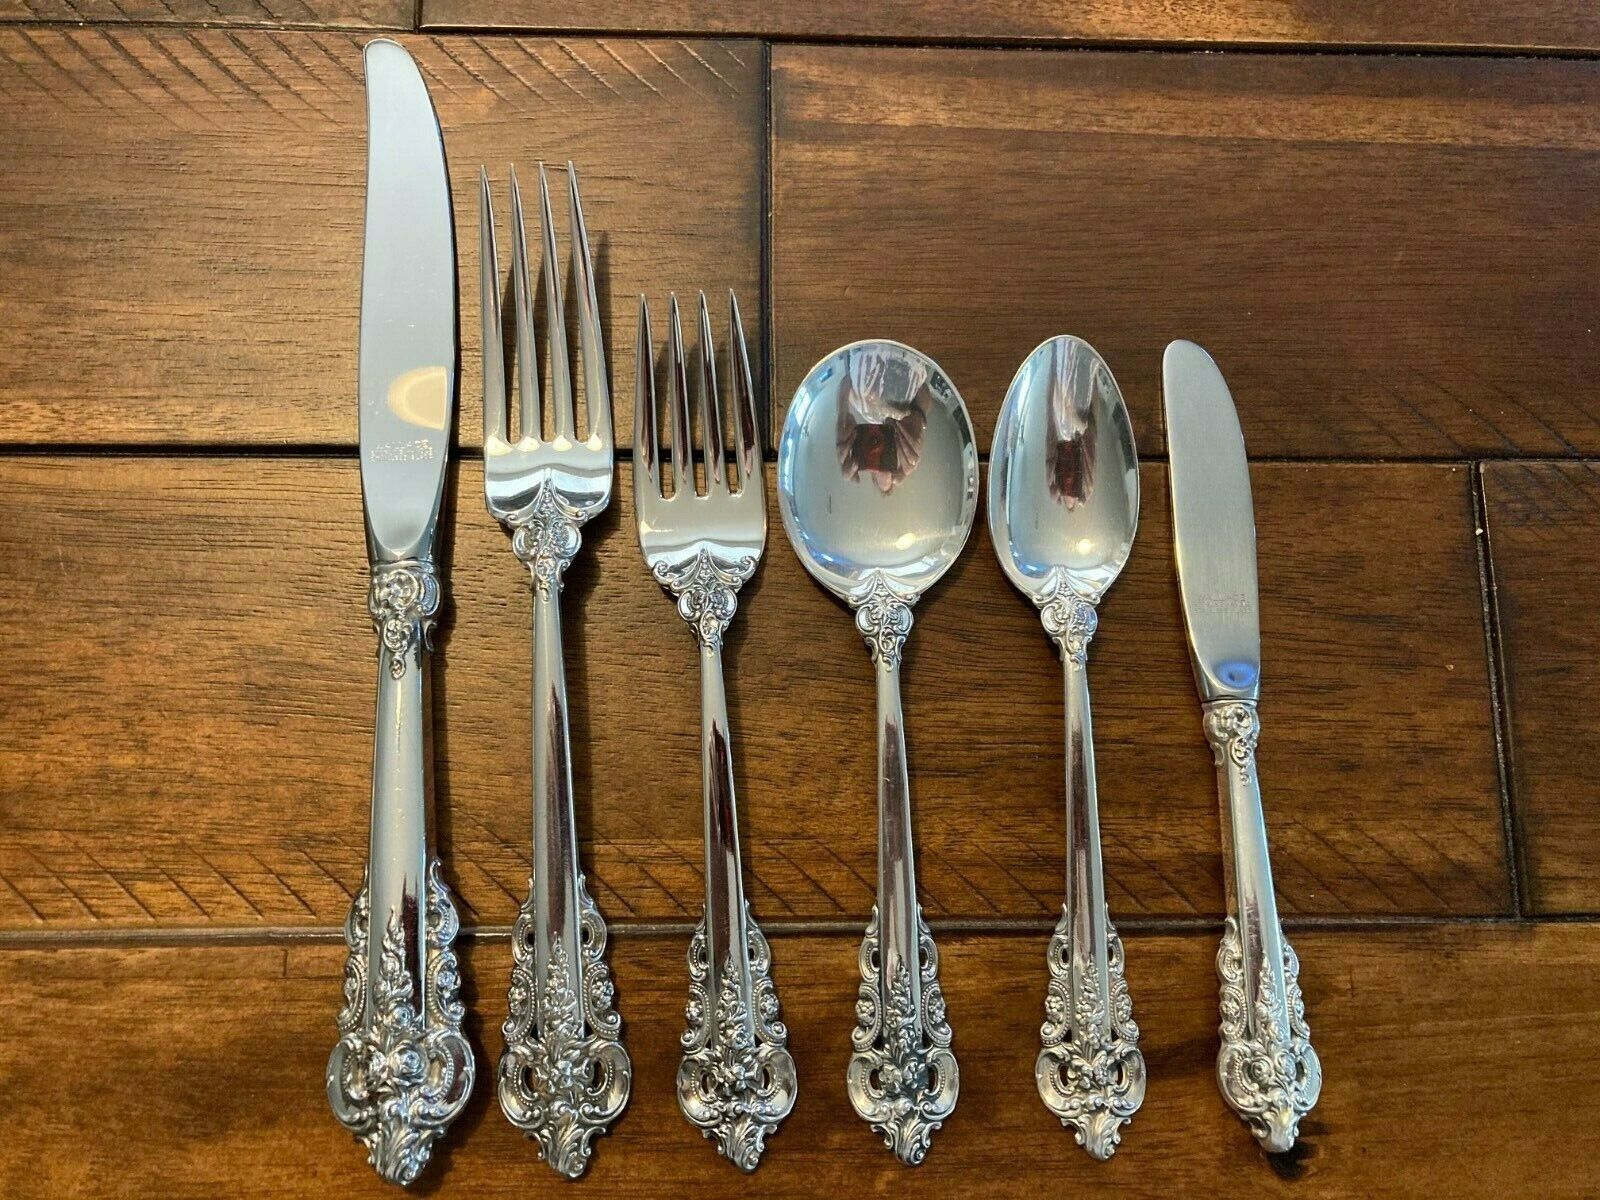 CLEAN WALLACE 6 PC GRANDE BAROQUE PLACE SETTING GRAND STERLING SILVER SET PIECE